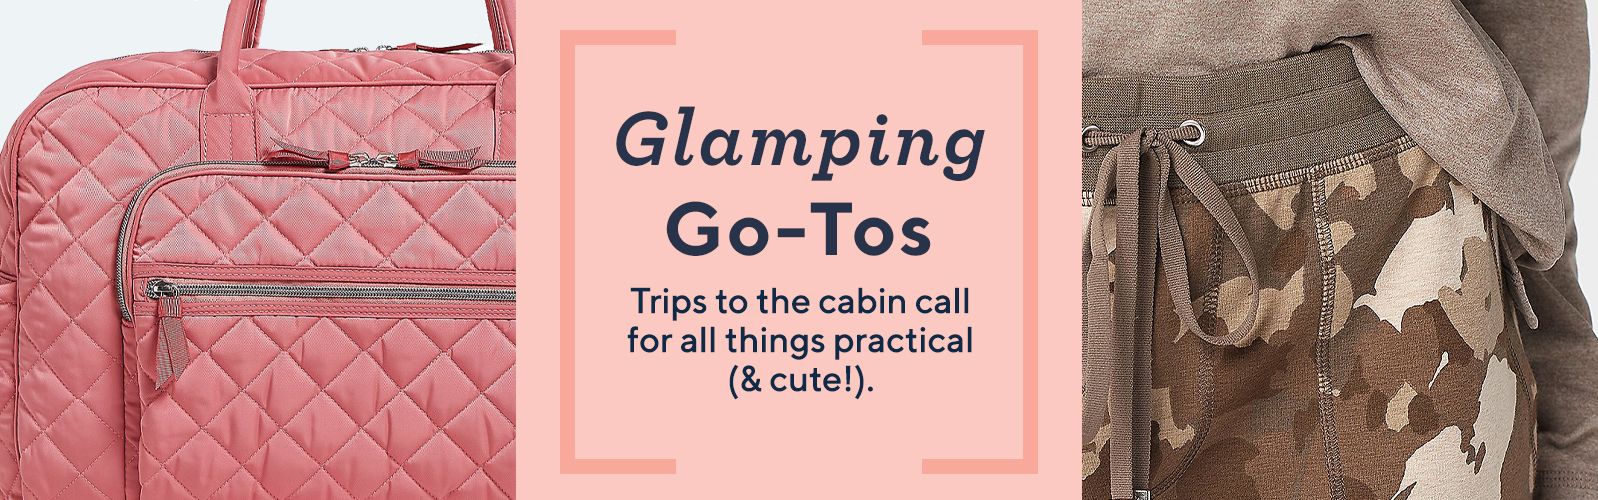 Glamping Go-Tos Trips to the cabin call for all things practical (& cute!).